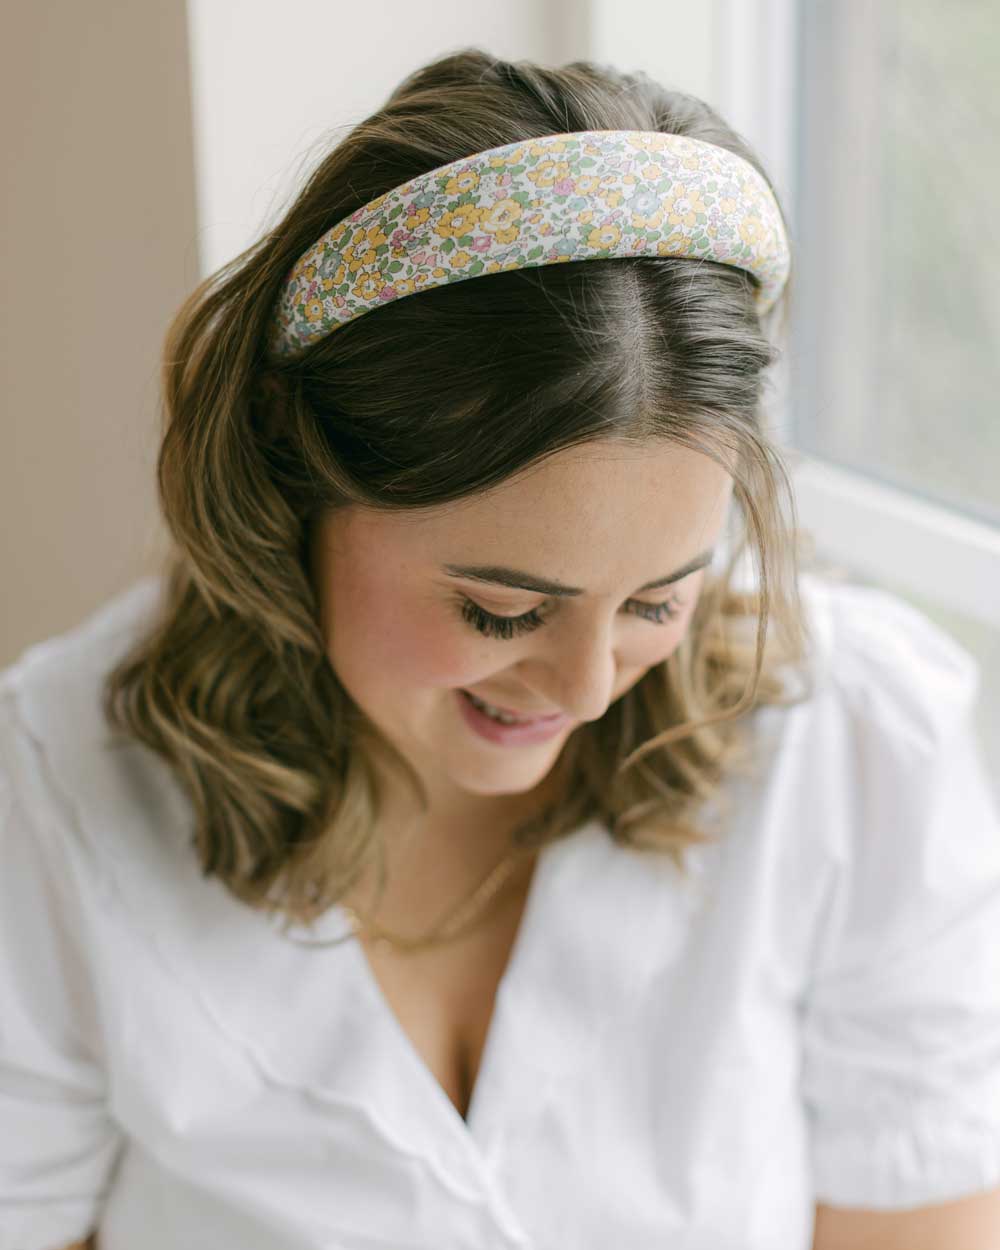 THE YELLOW FLORAL HEADBAND MADE WITH LIBERTY FABRIC